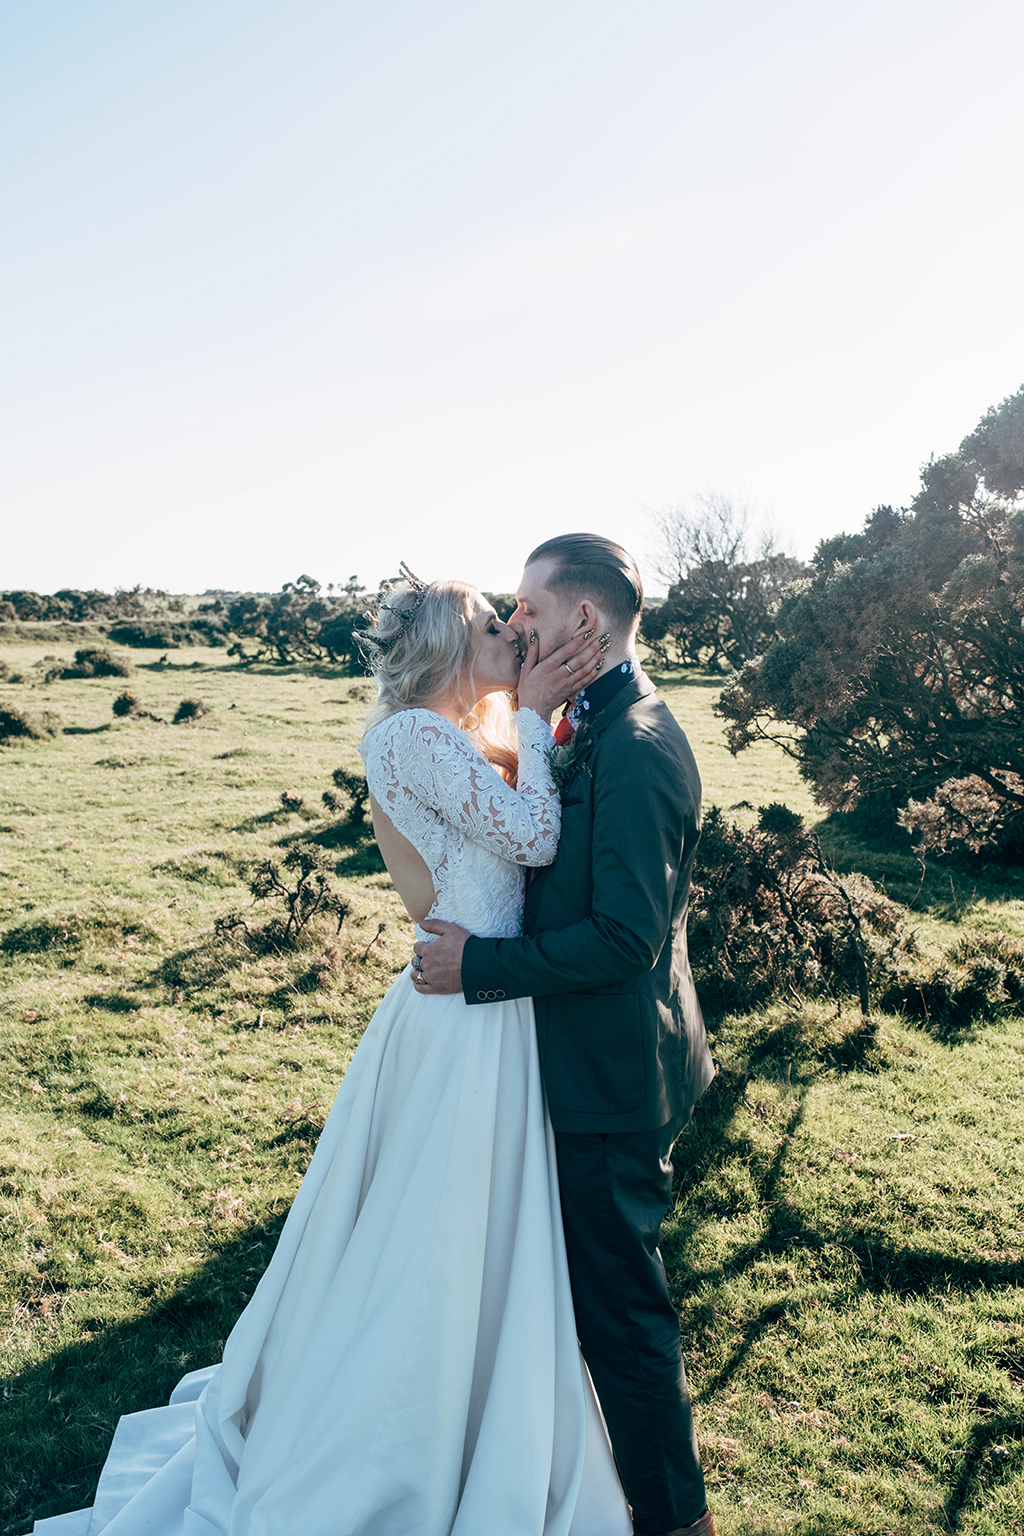 This couple went for a bold moorland wedding with a strong boho feel and rock n roll touches